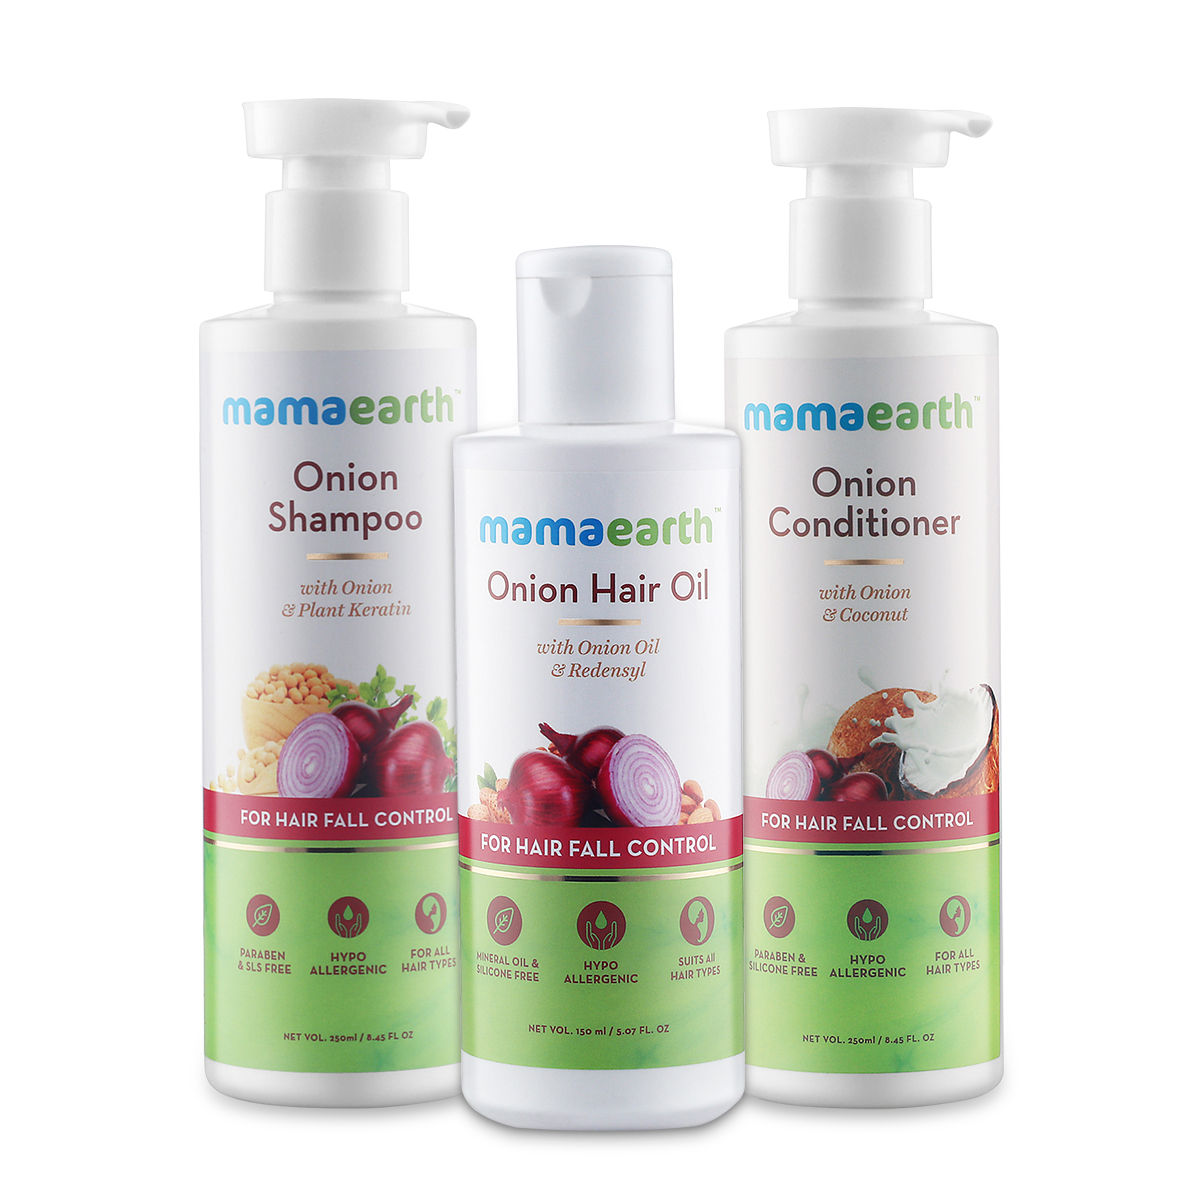 Mamaearth Onion Shampoo Review  Influsser